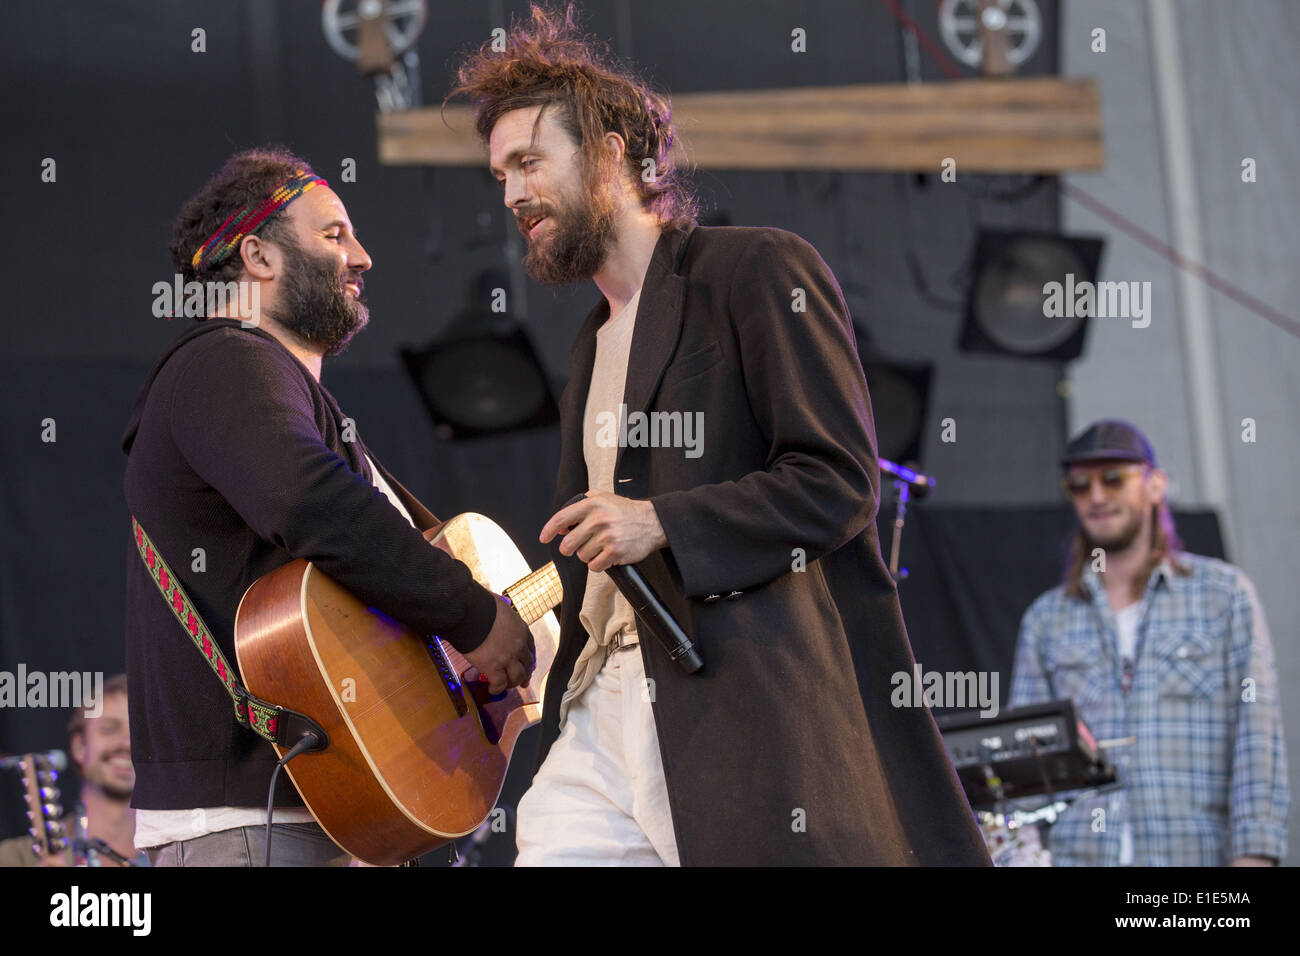 Chicago, Illinois, USA. 31st May, 2014. NICO AGLIETTI (L) and ALEX EBERT perform with Edward Sharpe and the Magnetic Zeros at the FirstMerit Bank Pavilion at Northerly Island in Chicago, Illinois © Daniel DeSlover/ZUMAPRESS.com/Alamy Live News Stock Photo